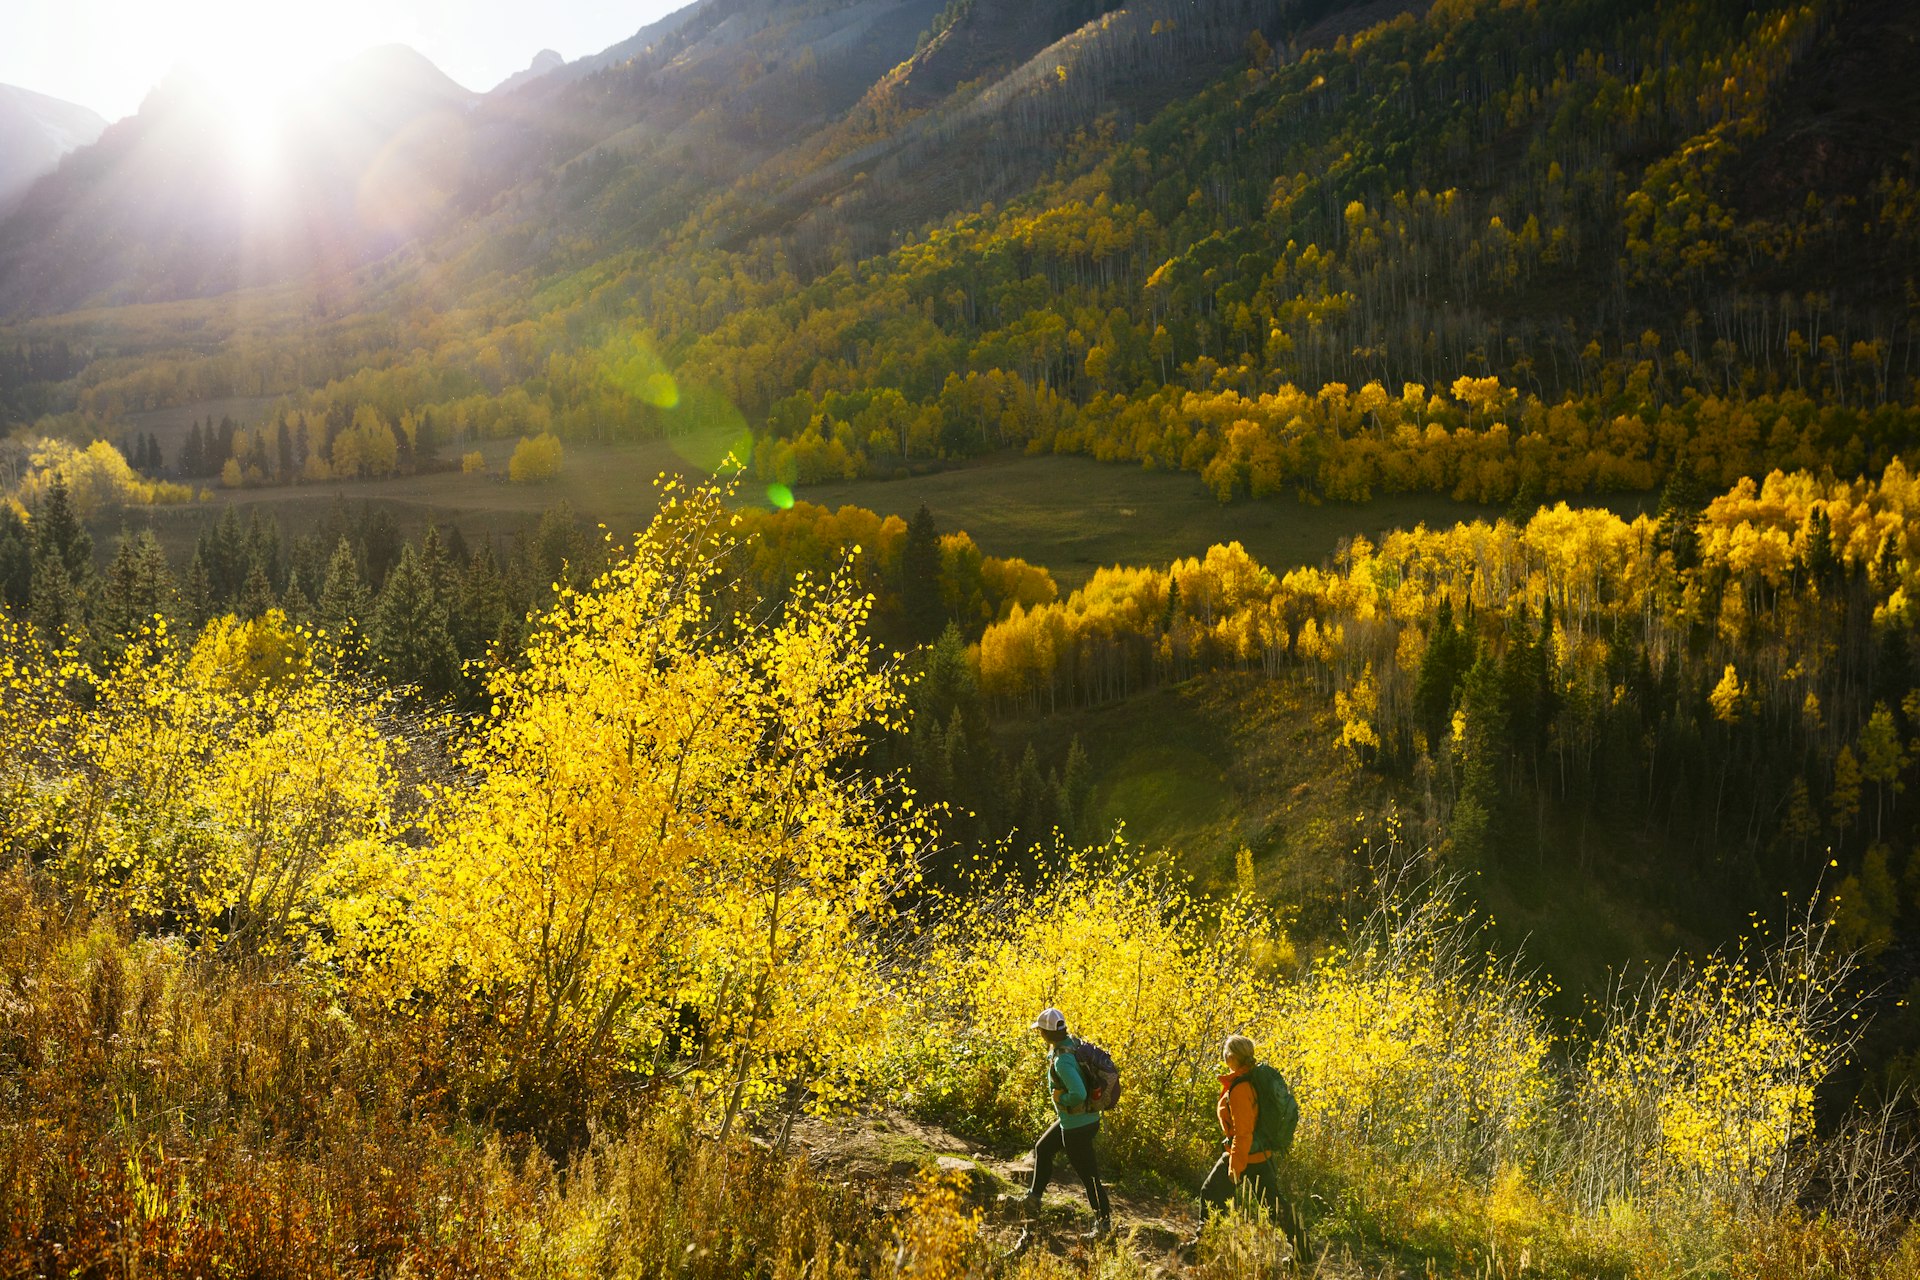 Out for a fall hike in Telluride, Colorado